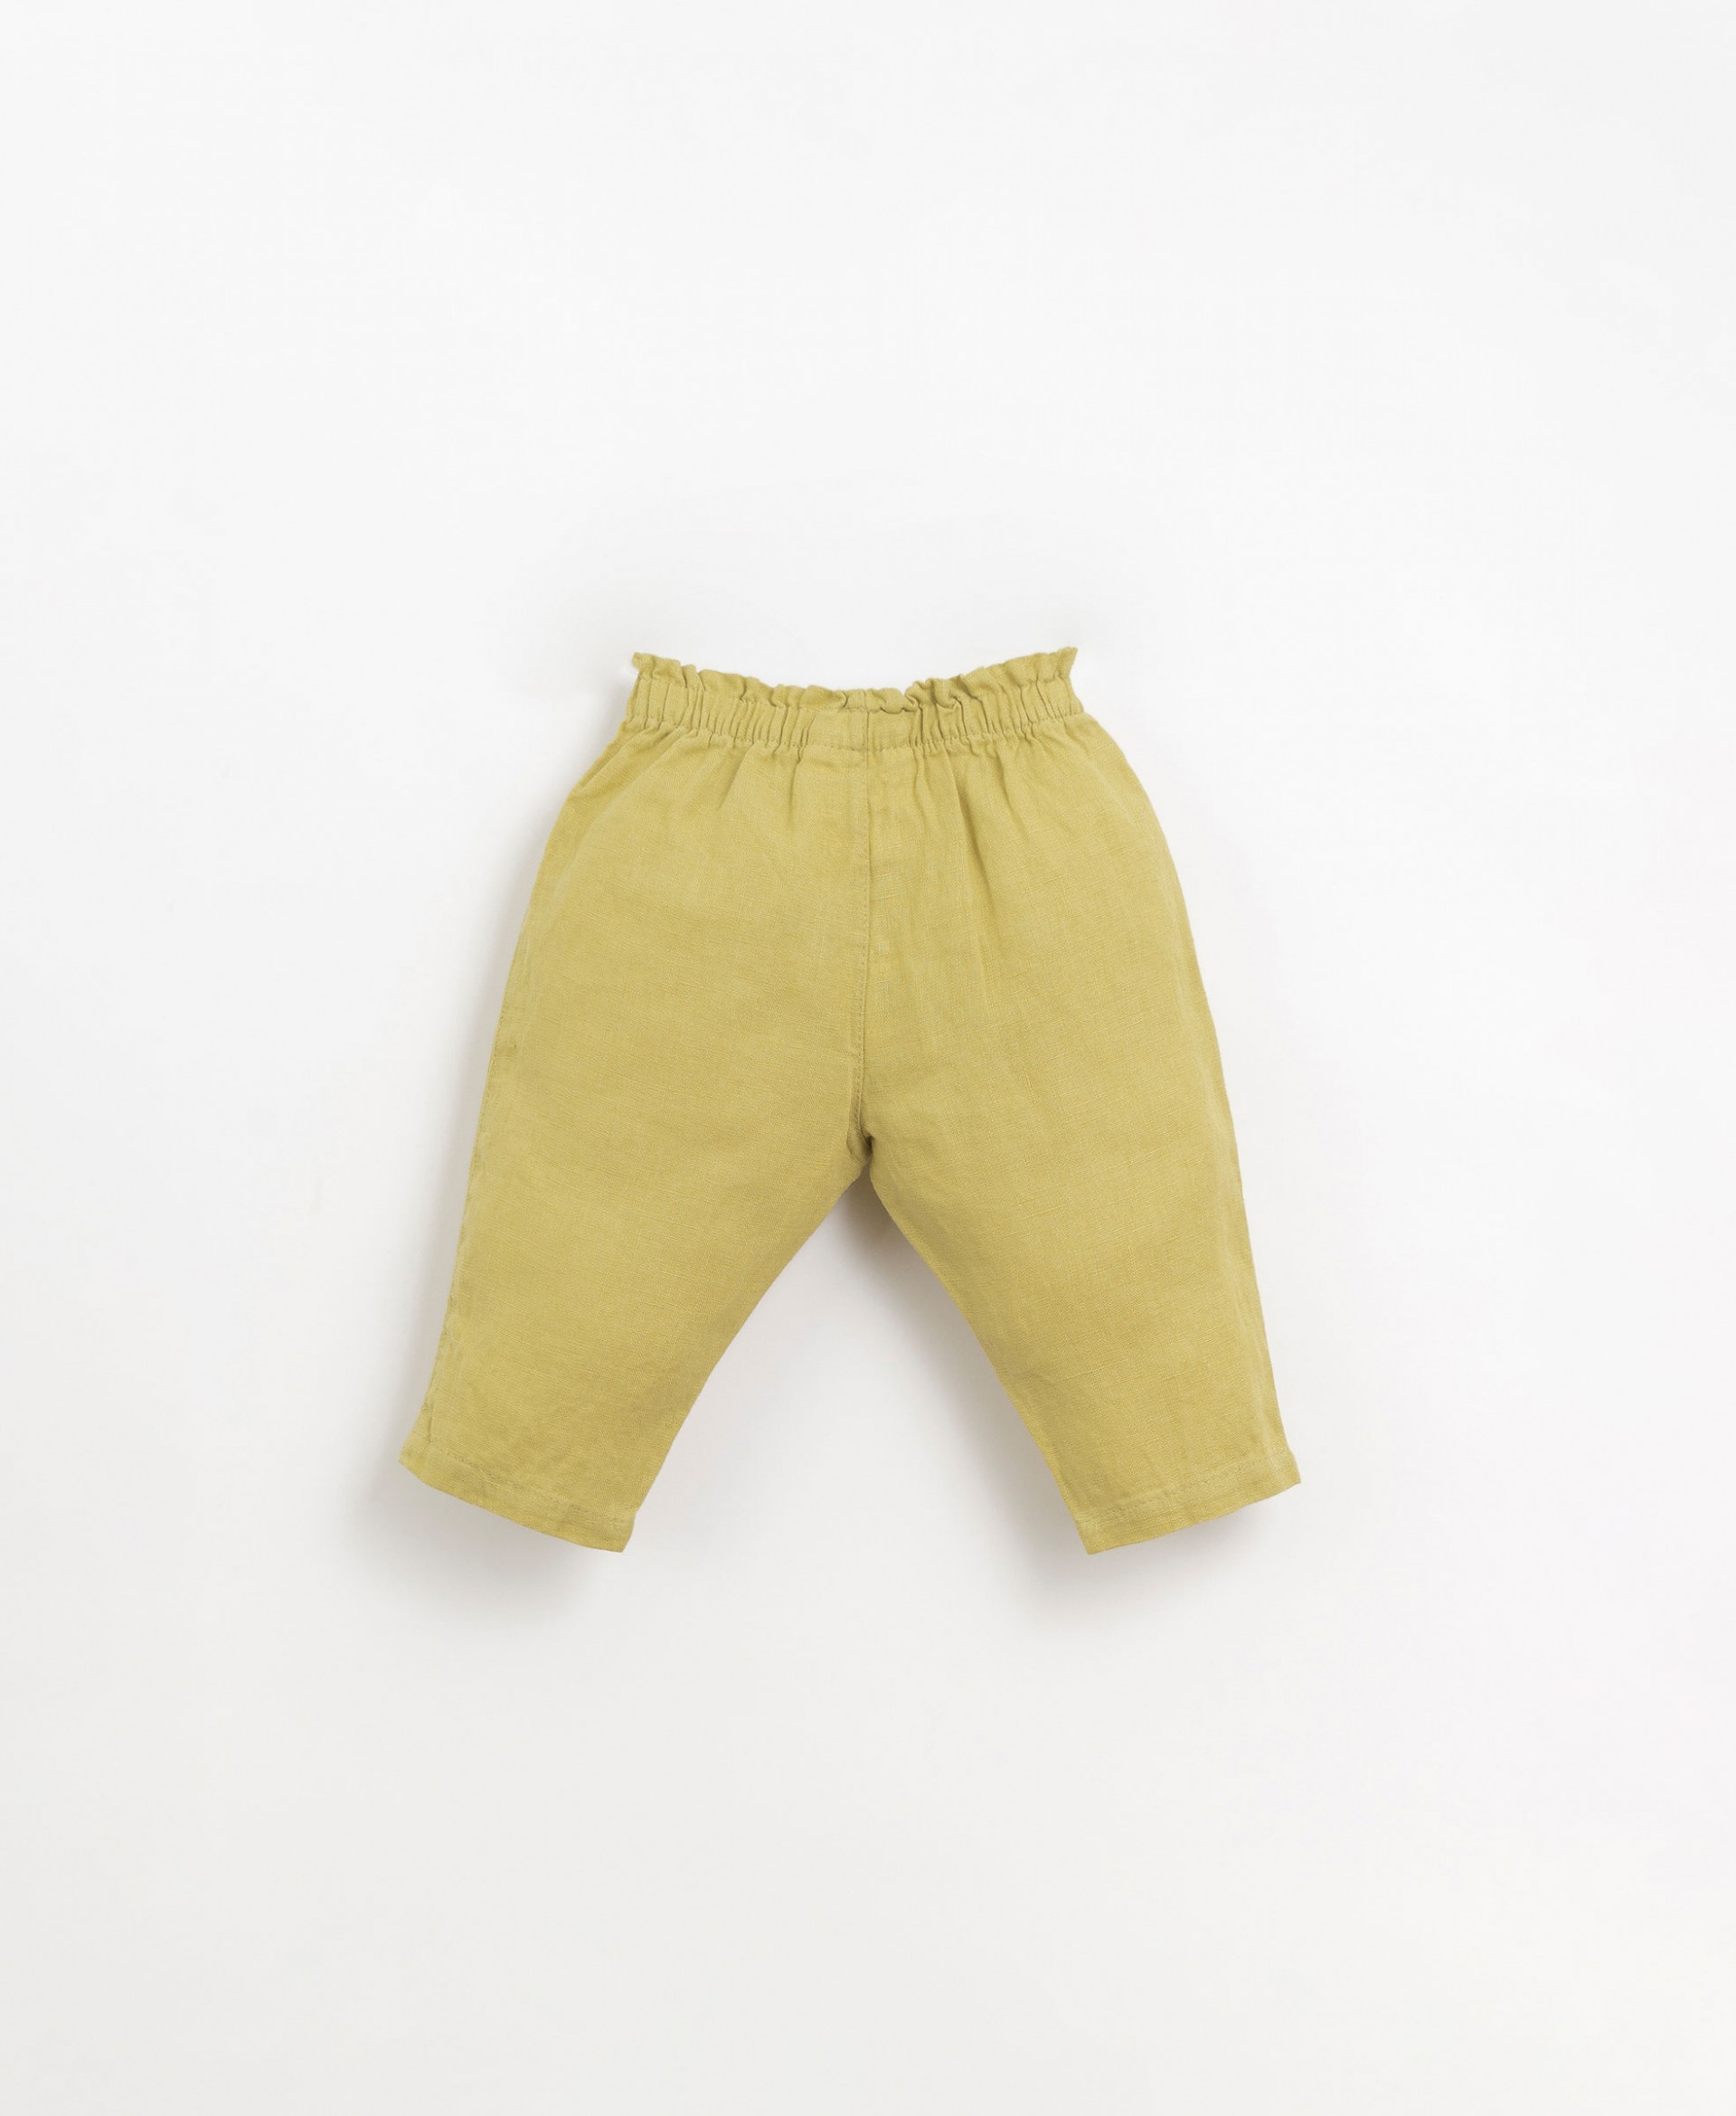 Linen trousers with elastic waist and decorative drawstring | Organic Care